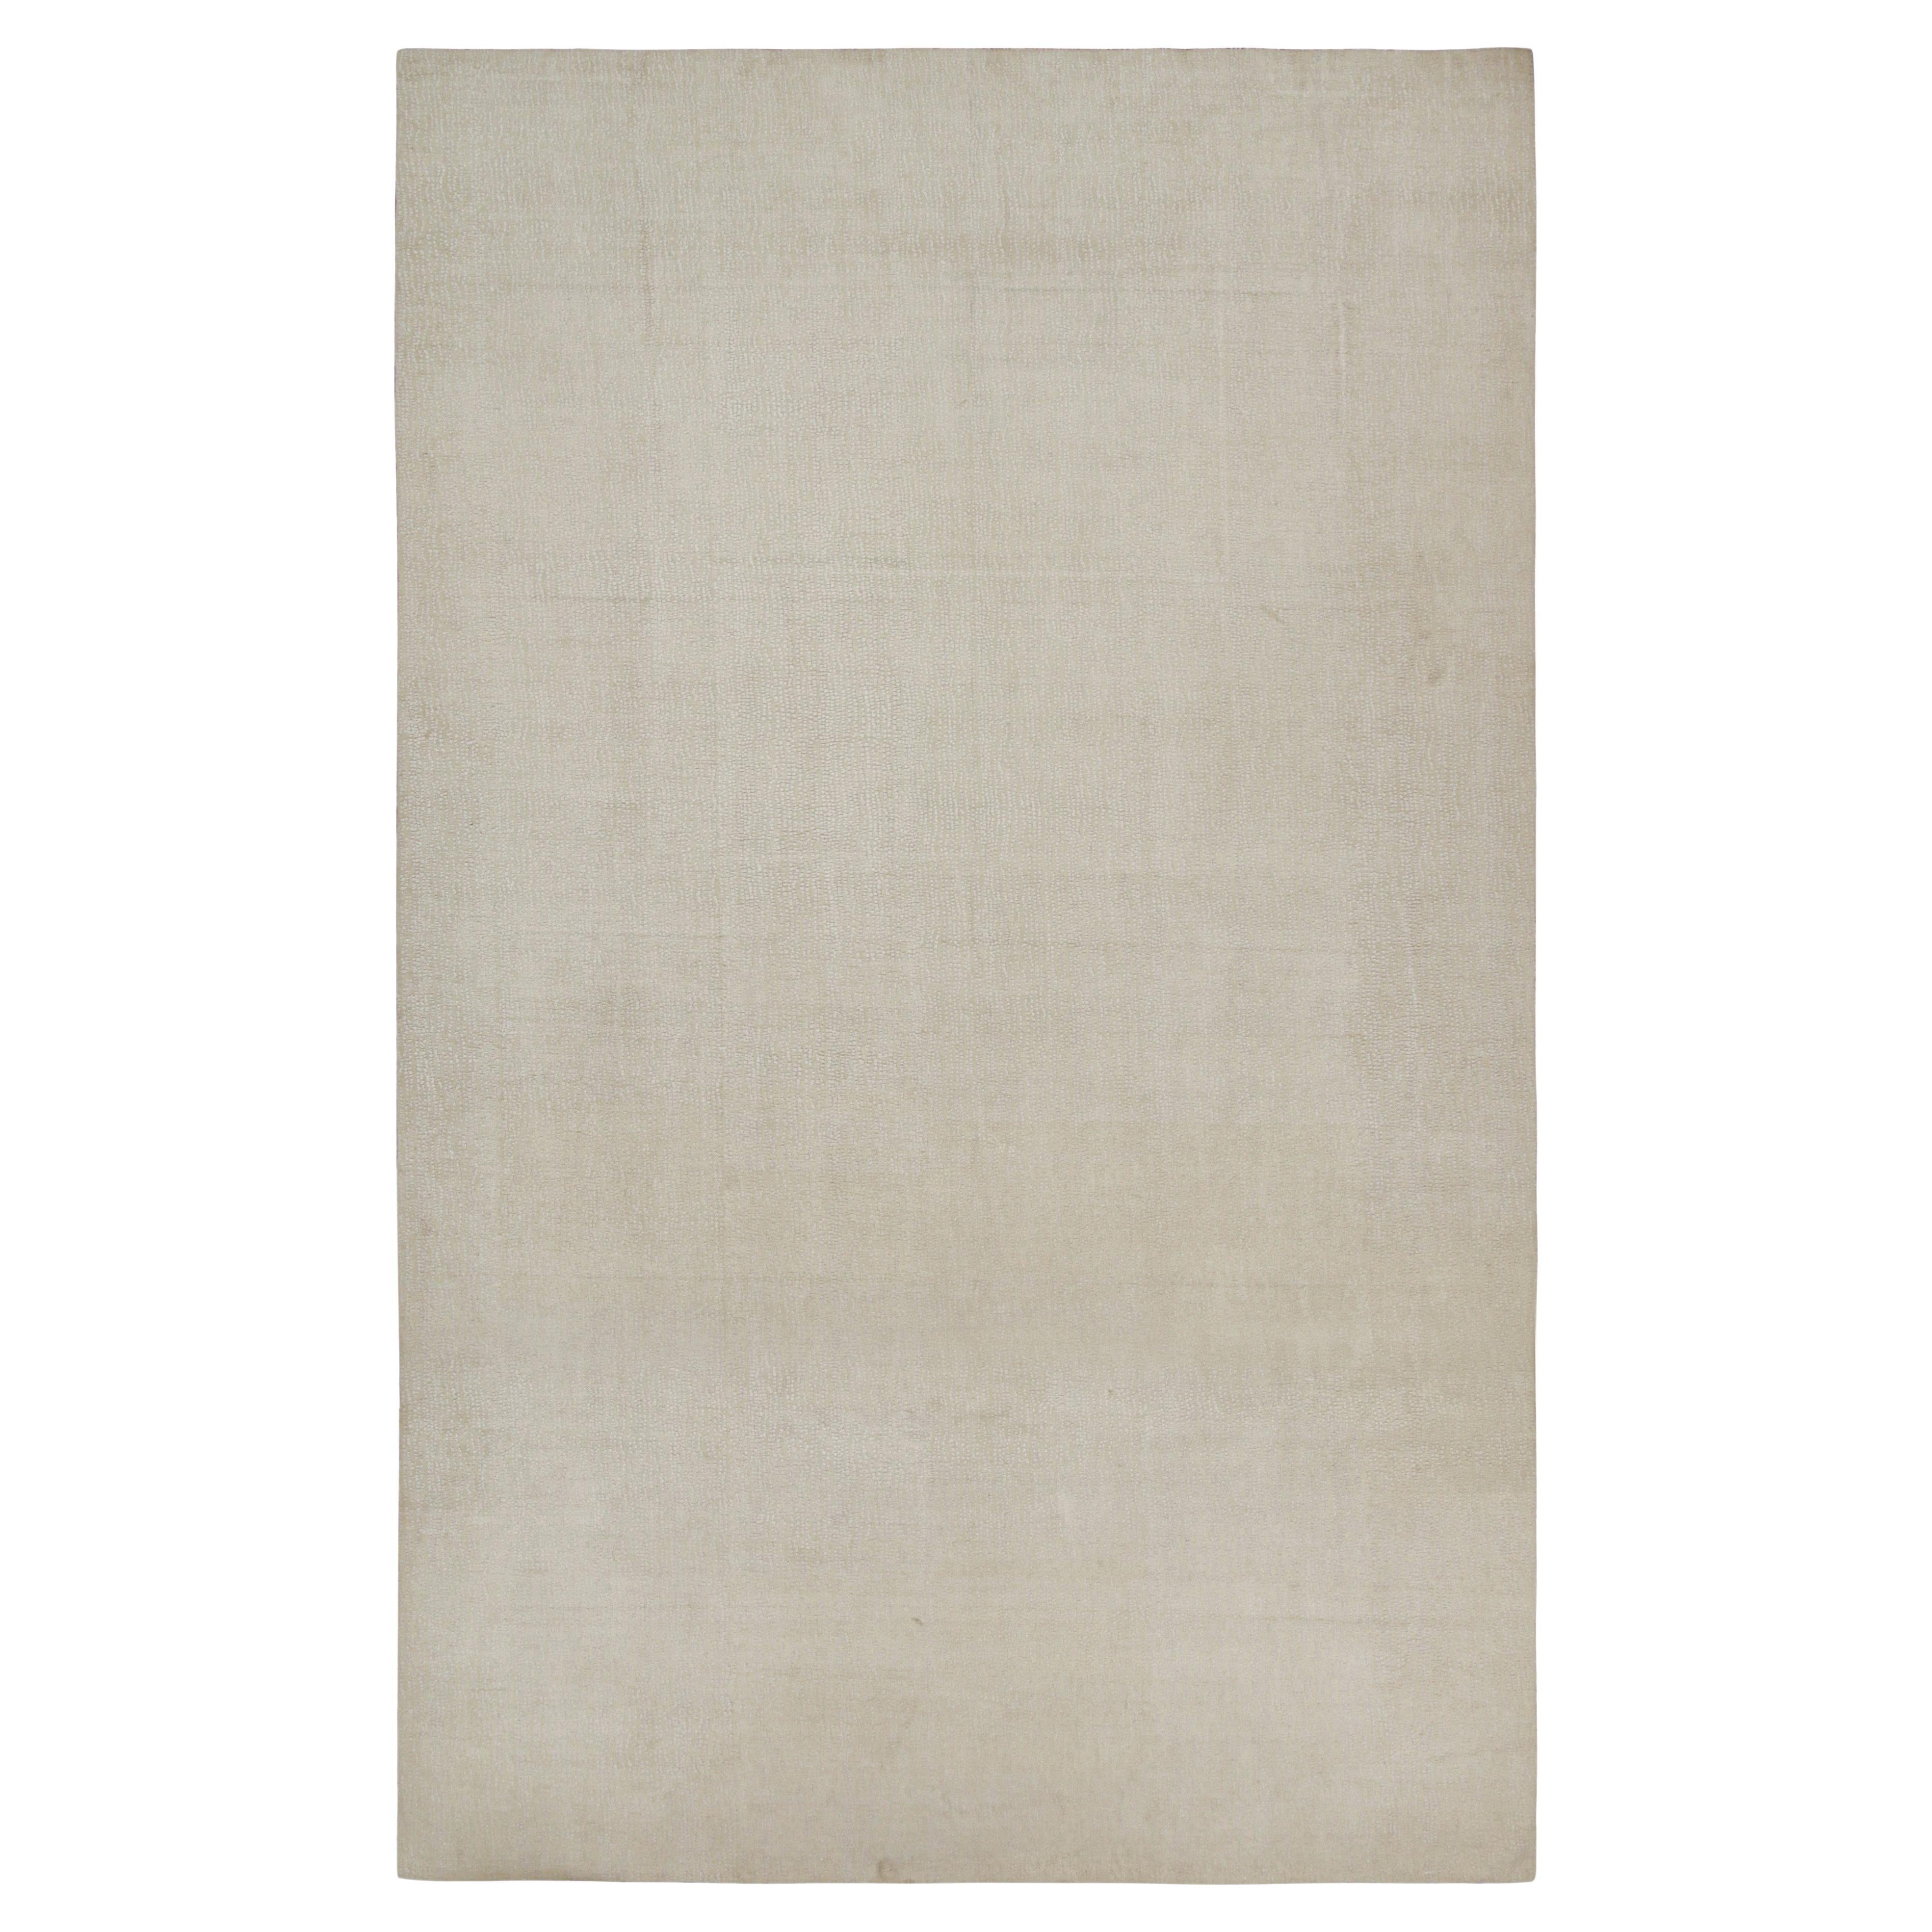 Rug & Kilim's Modern High-and-Low Textural Rug Design in Off-White